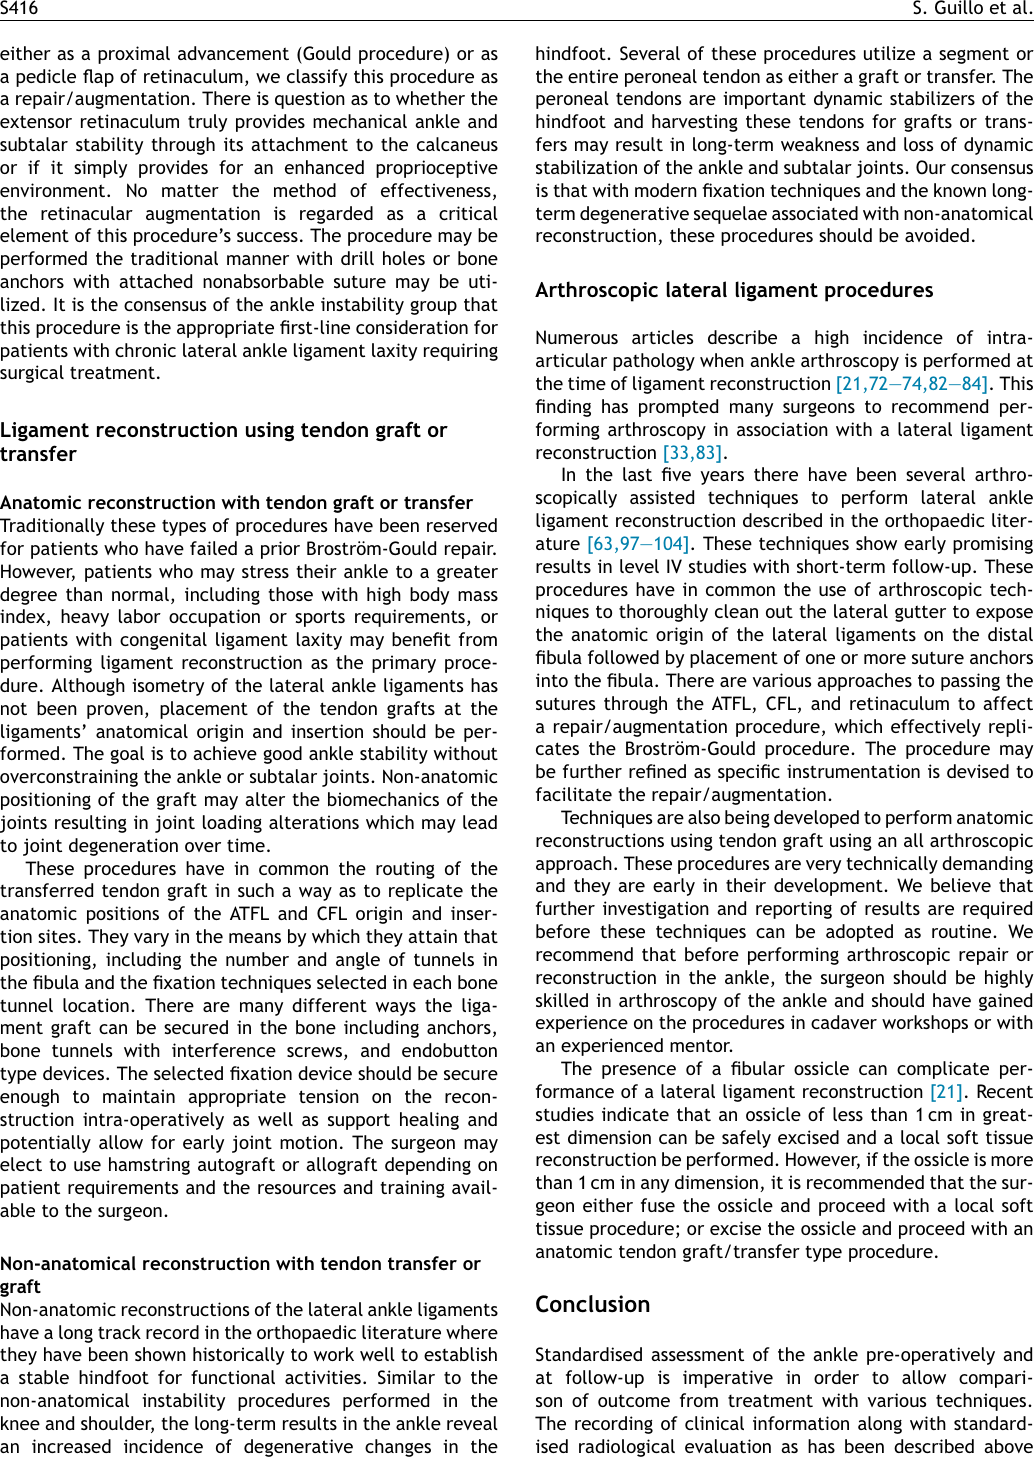 Page 6 of 9 - Consensus In Chronic Ankle Instability  OTSR CAI 20131